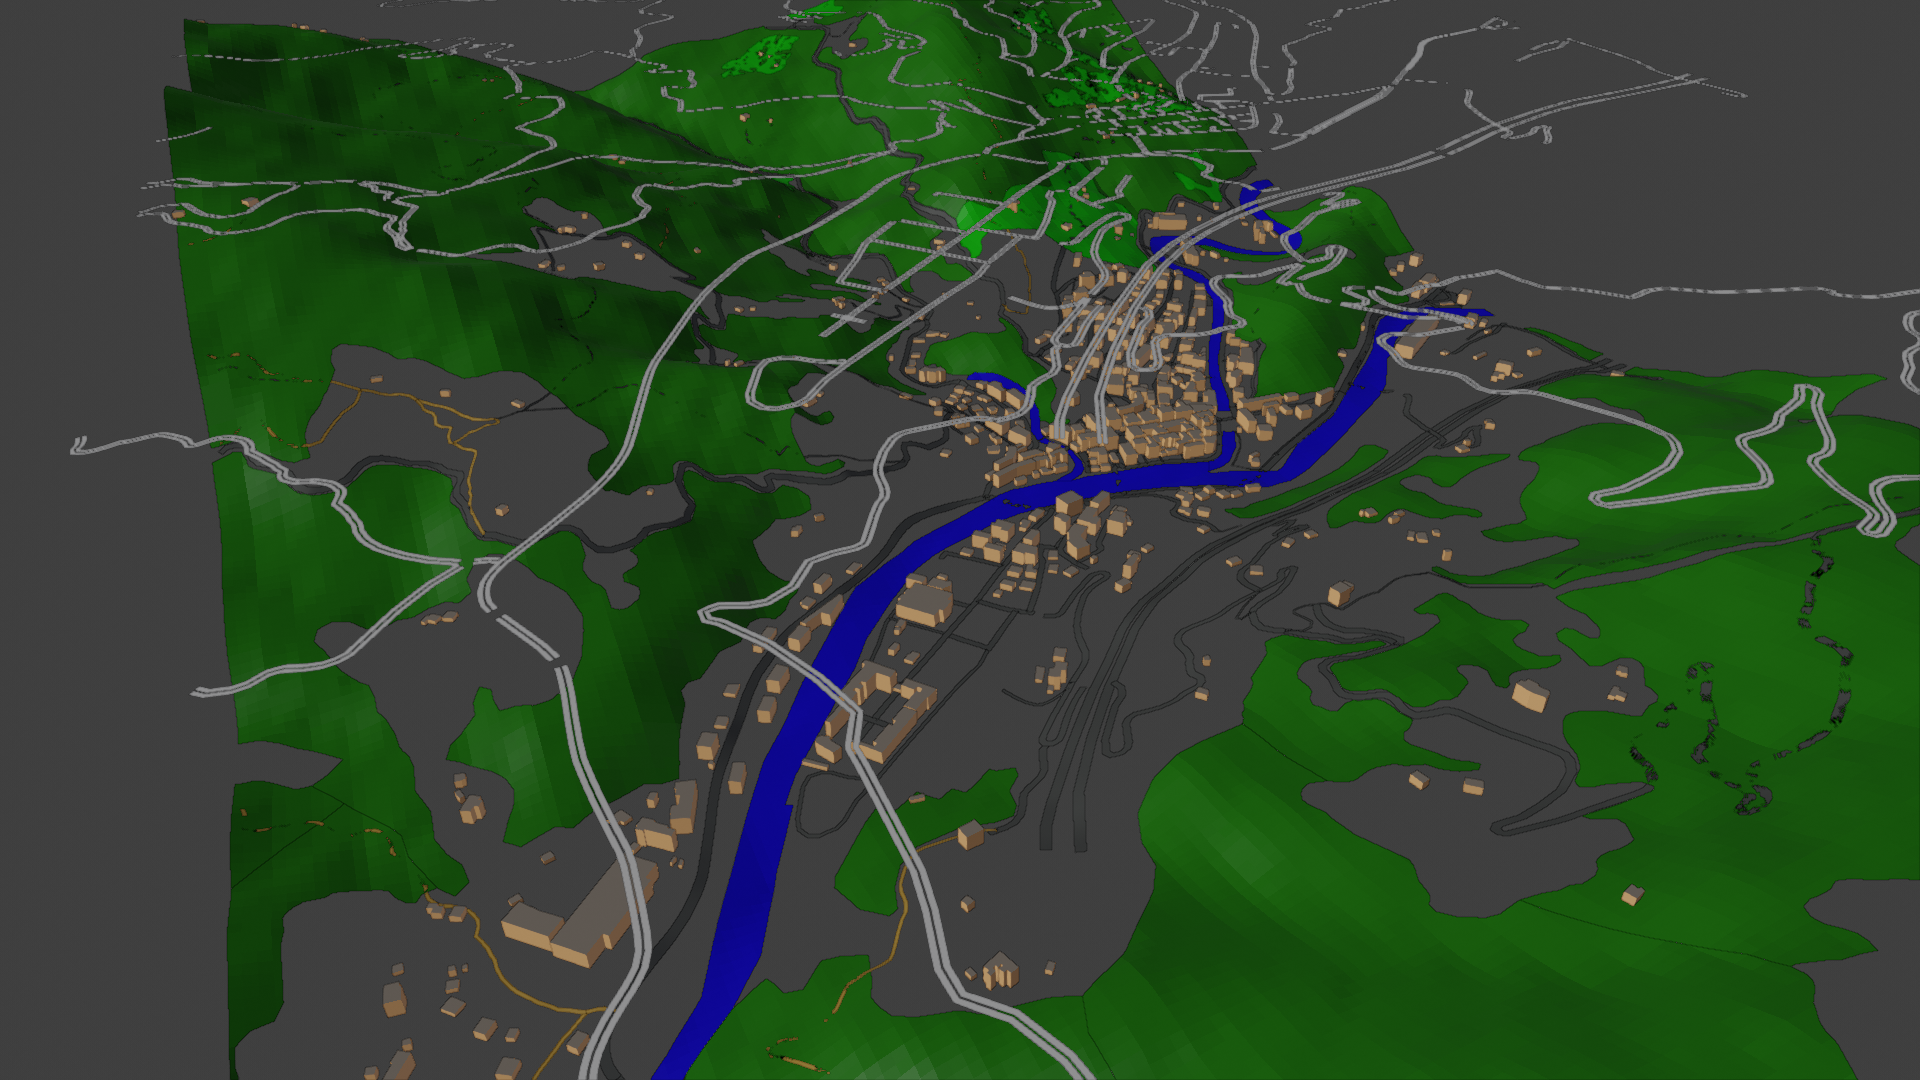 ../../_images/view3d-traffic-osm-terrain-2.png